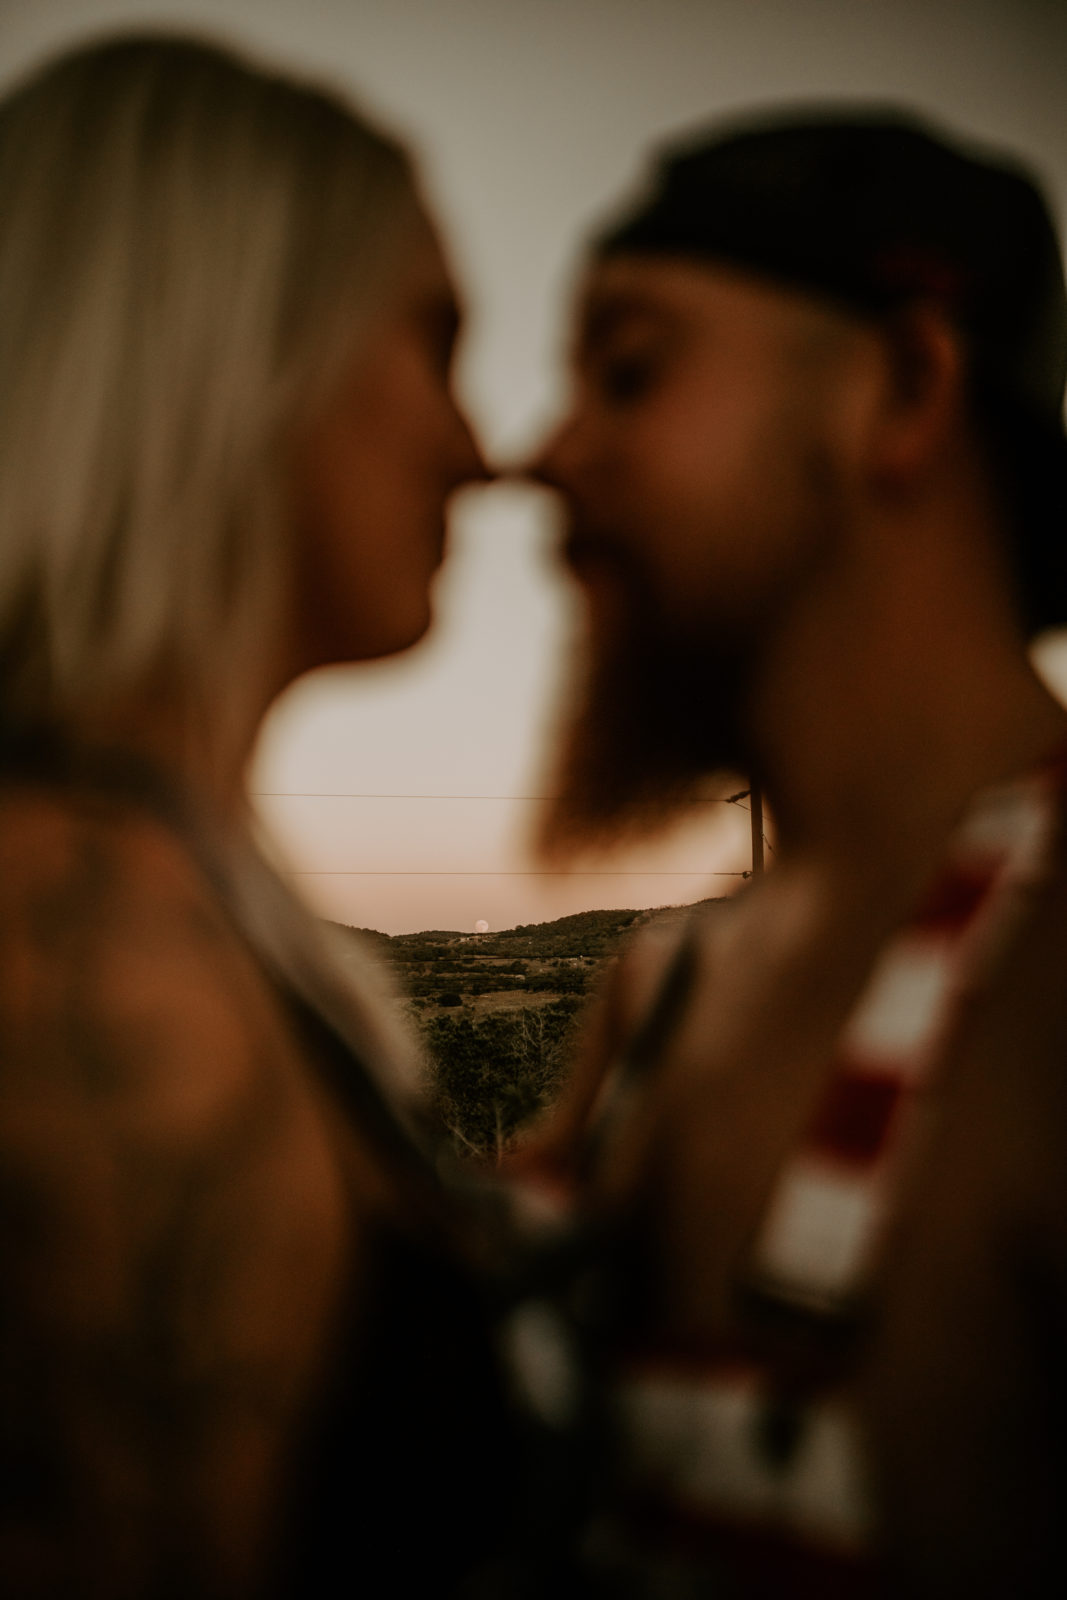 blurred close up photo of couple nose to nose with a clear photo between them of Texas desert